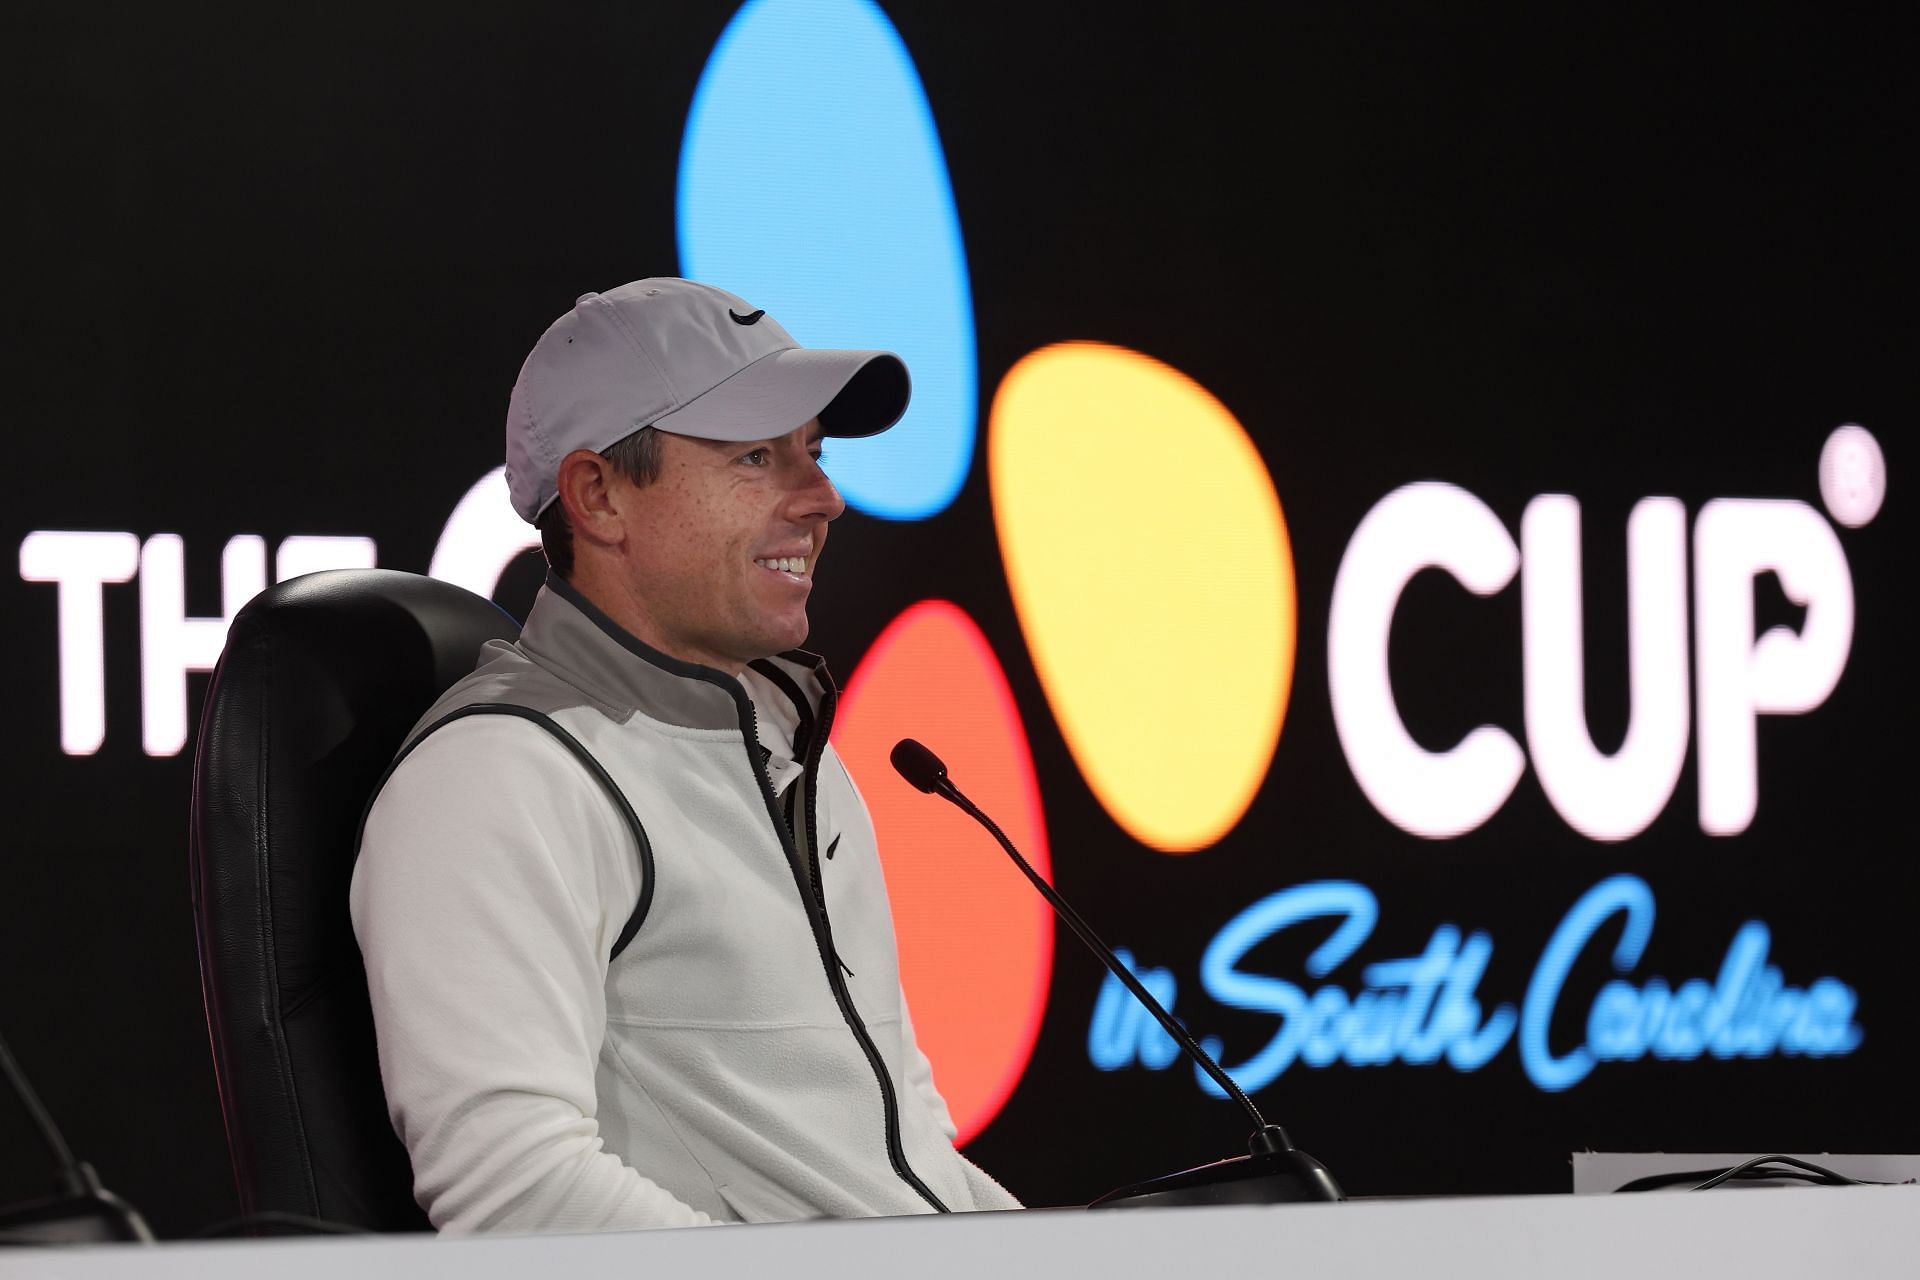 Rory McIlroy at The CJ Cup - Preview Day 3 (Image via Gregory Shamus/Getty Images)